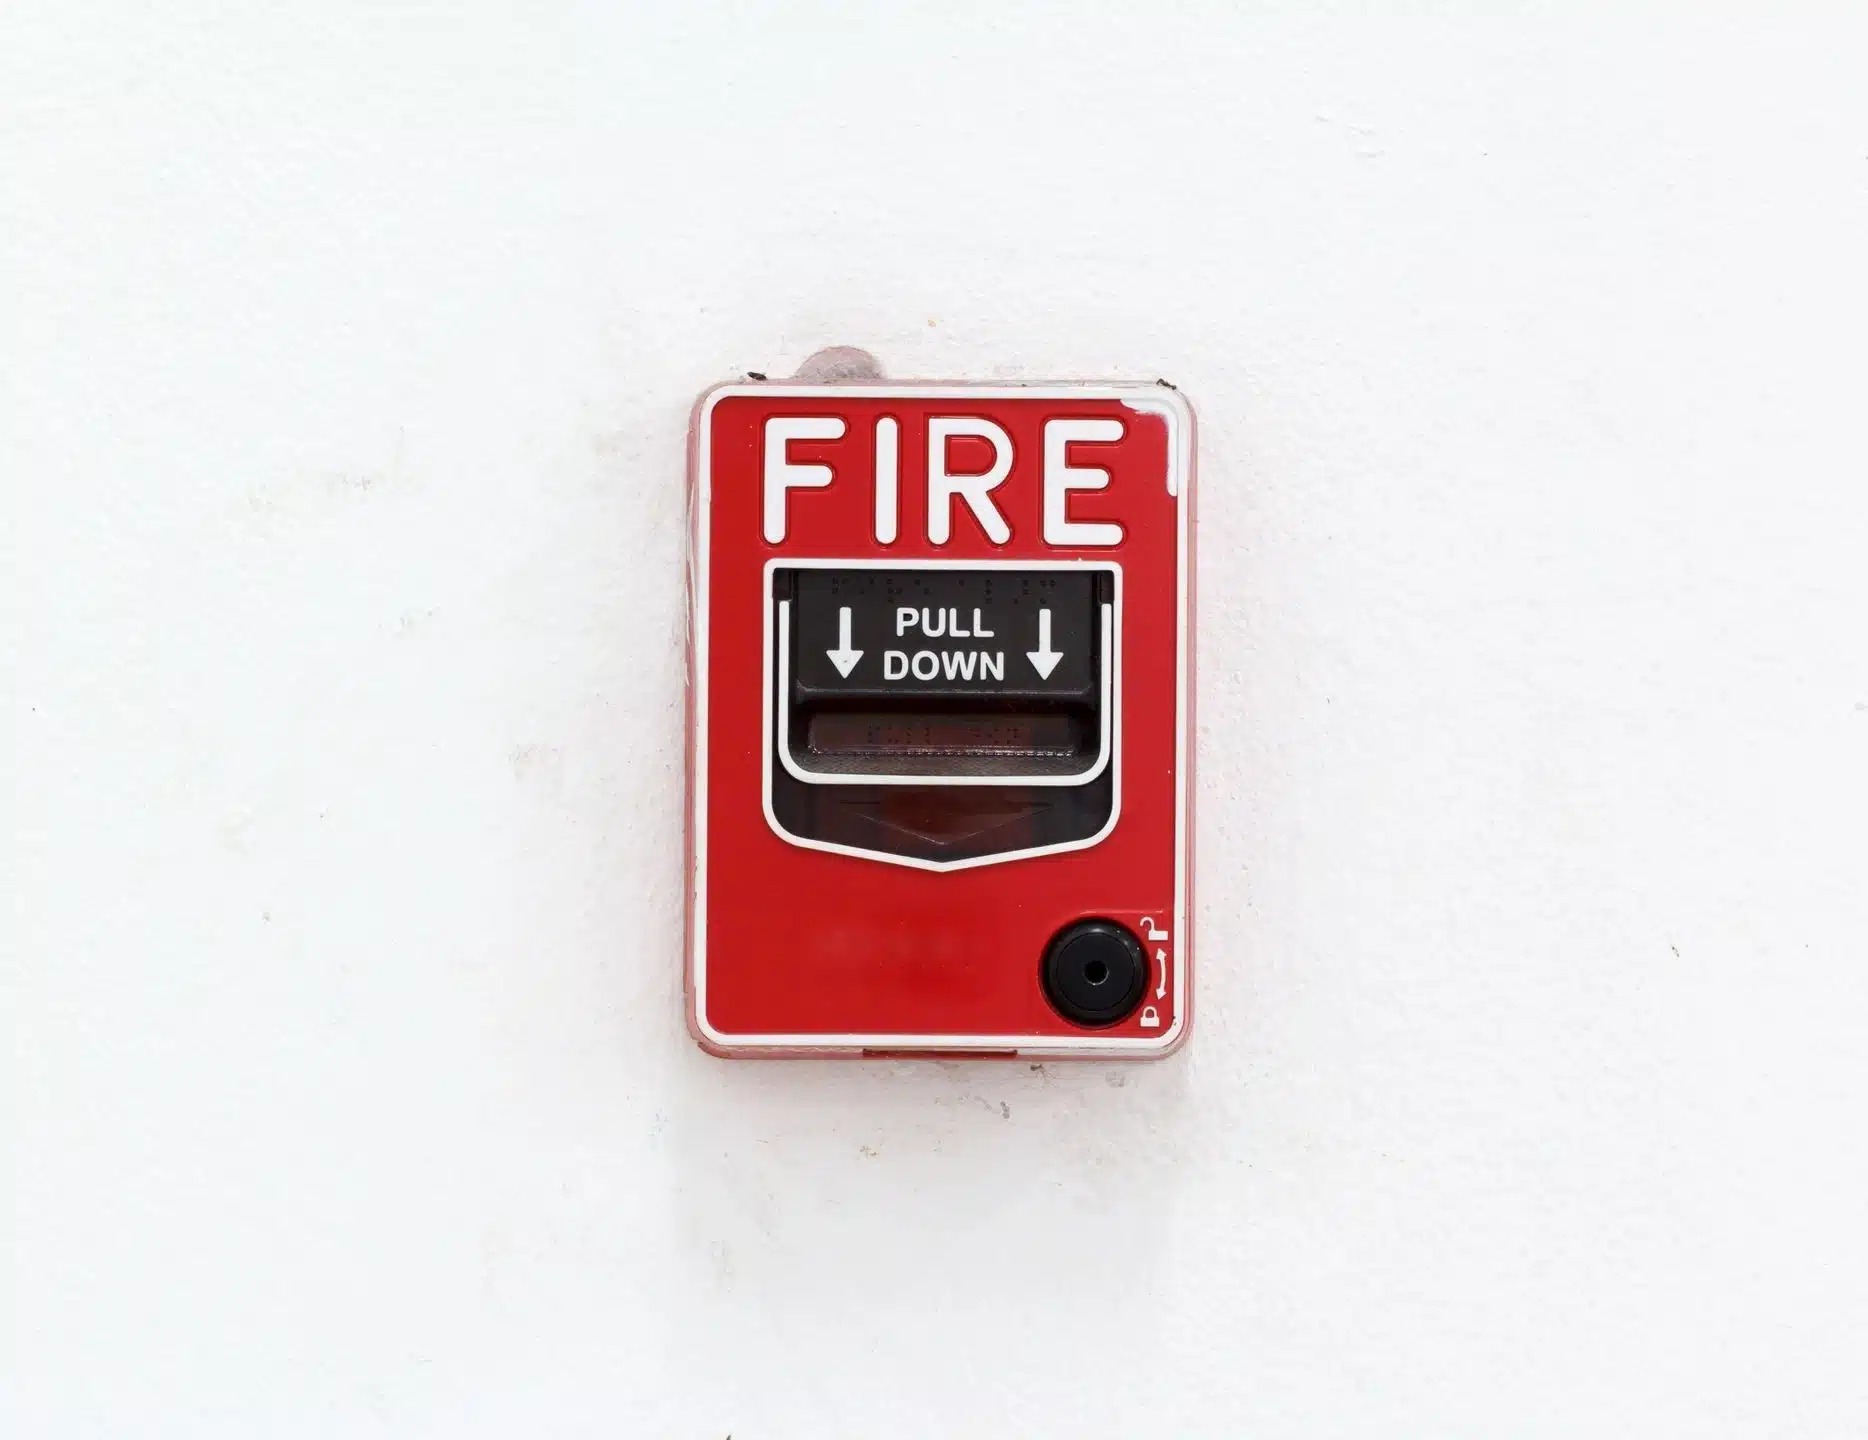 fire alarm system testing and inspections